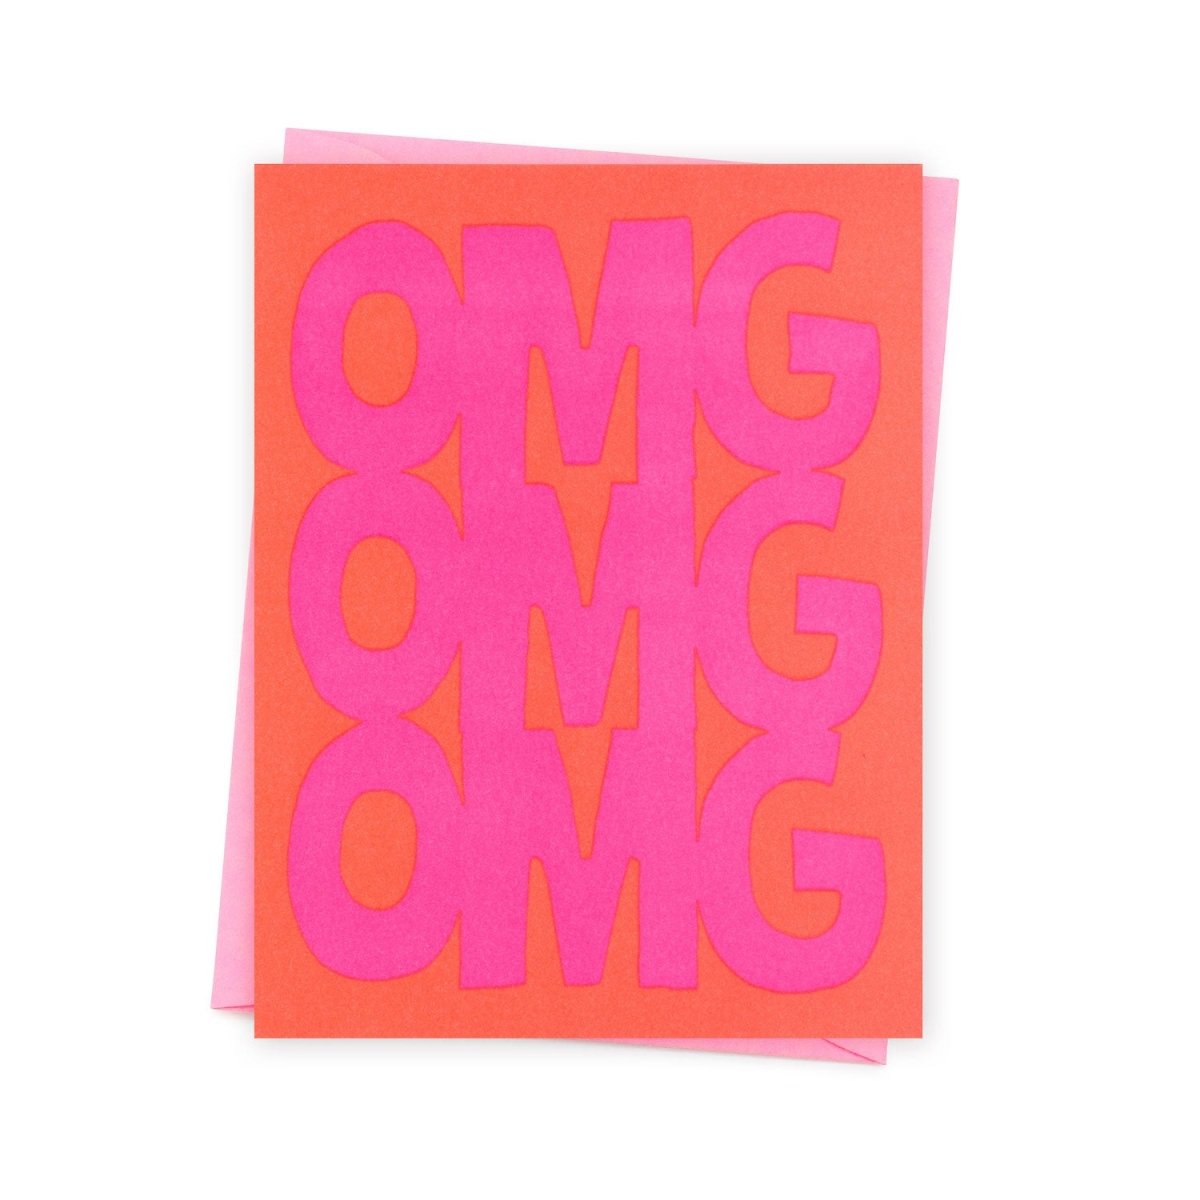 Bright orange card with large text in neon pink that reads: "OMG OMG OMG." Comes with a pink envelope. Designed by Ashkahn and printed in Portland, OR.